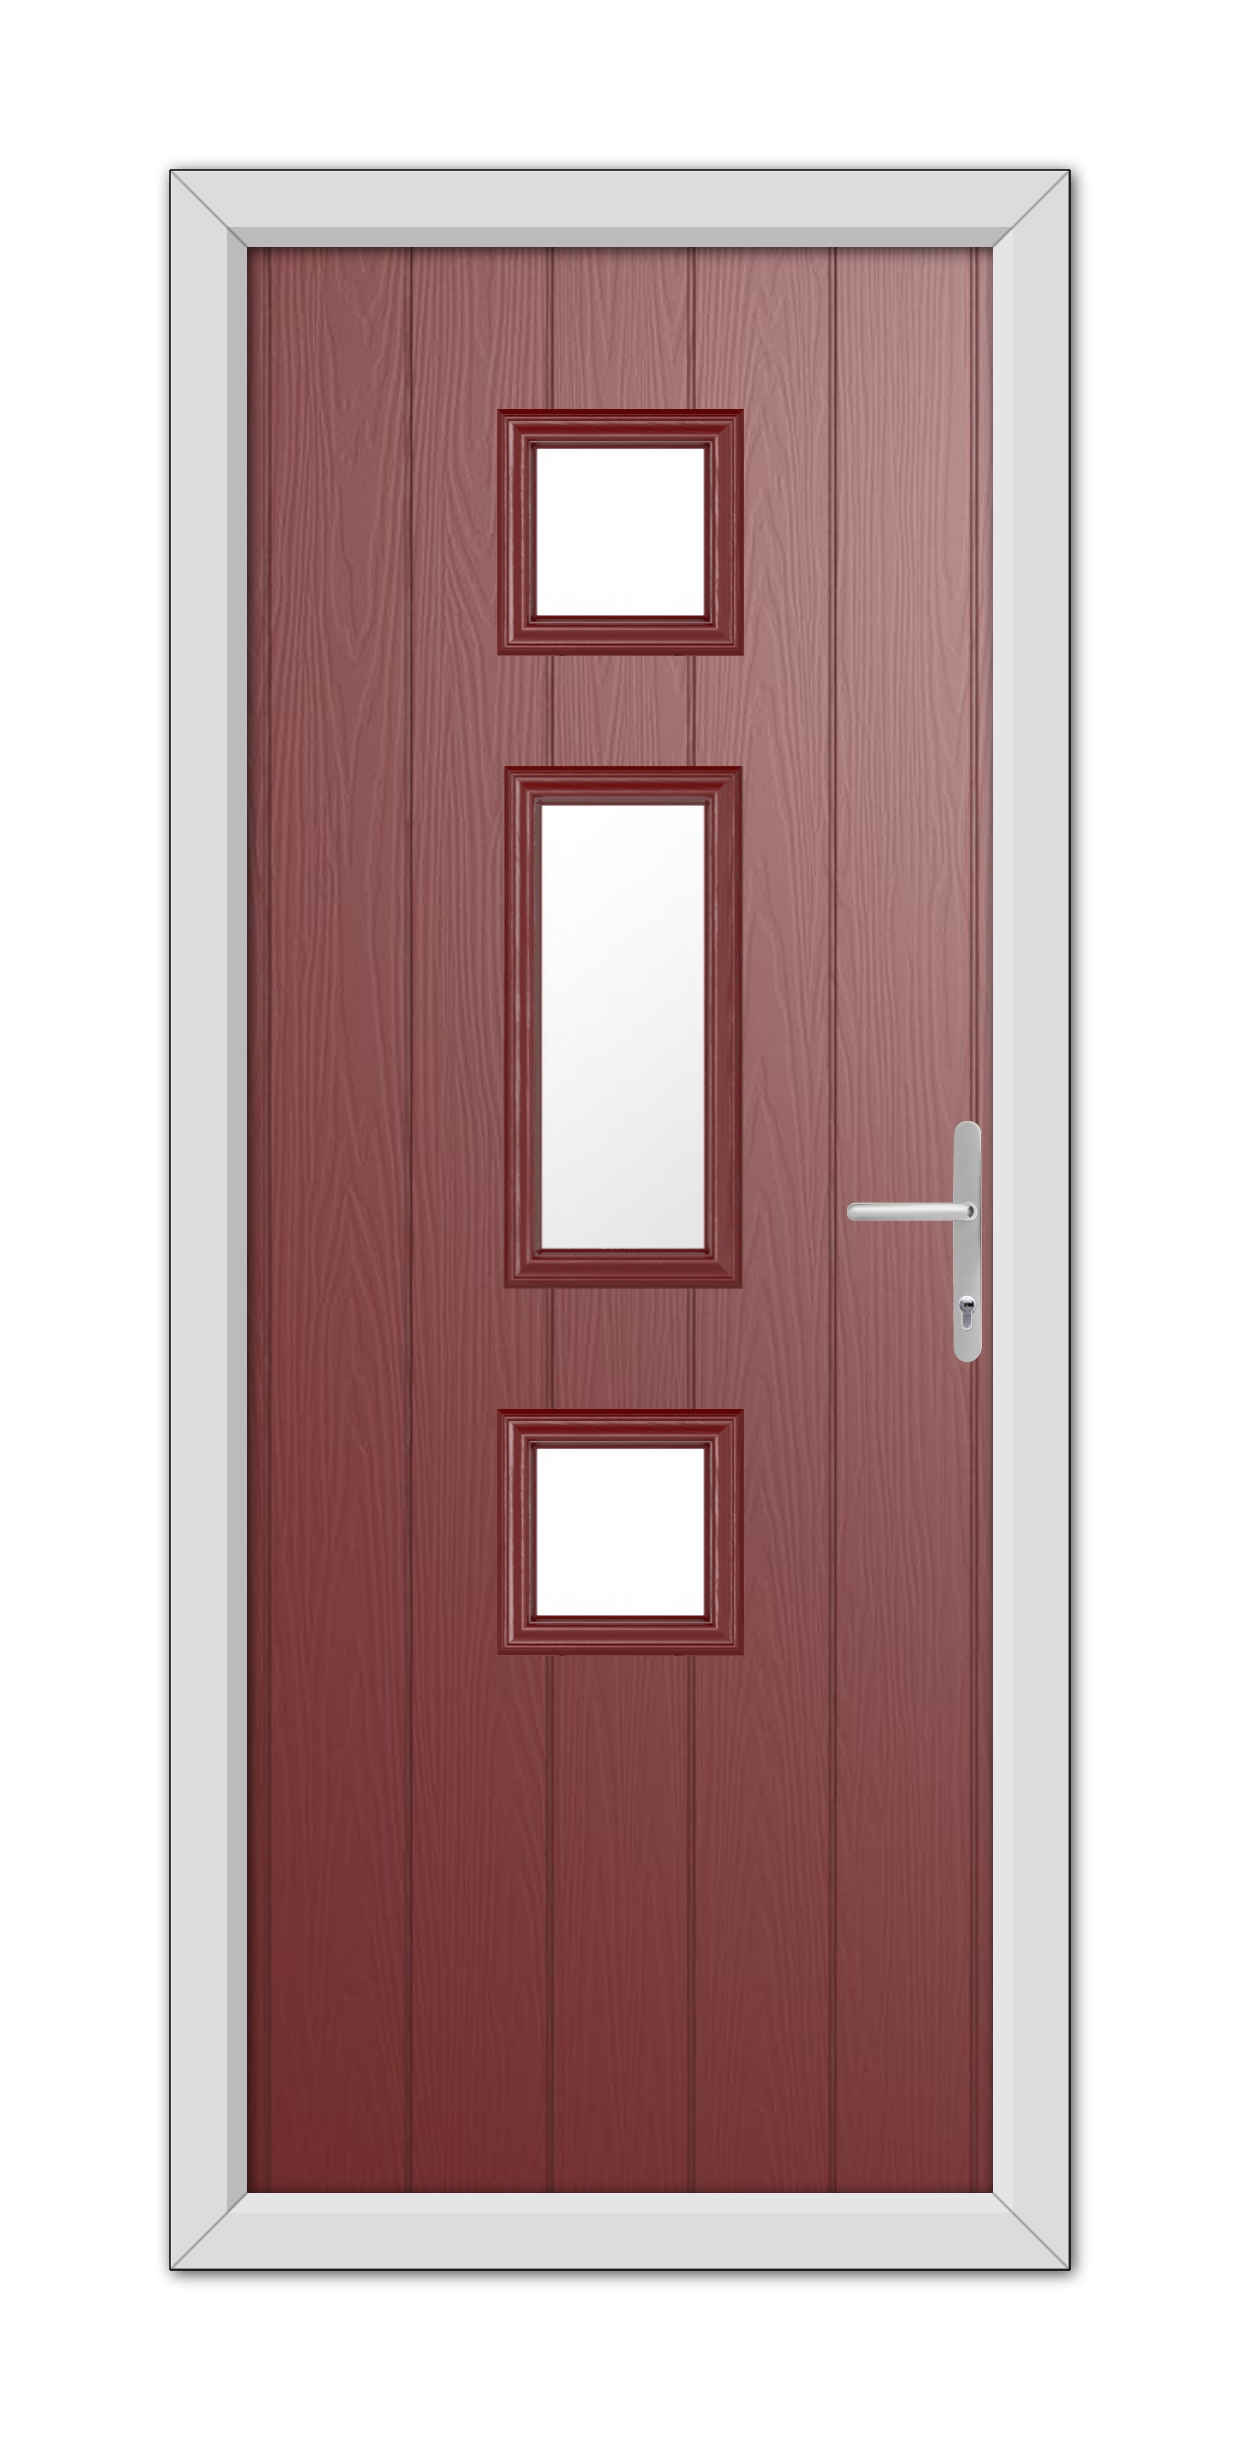 A modern Red York Composite Door 48mm Timber Core with three vertical glass panels and a silver handle, set in a white frame.